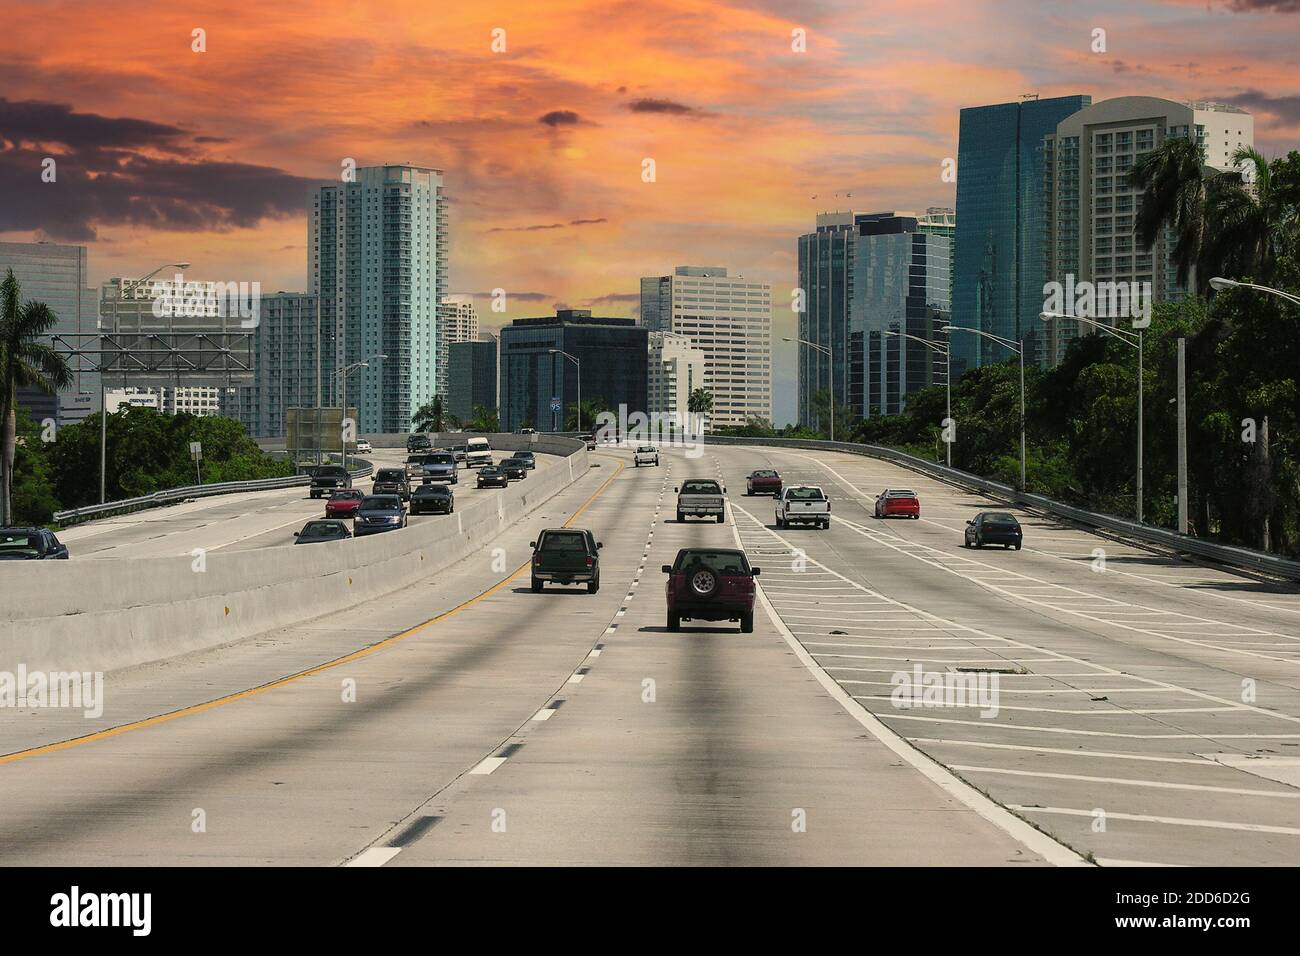 Archival September 2005 view of Interstate 95 freeway in Miami Florida with sunset sky. Stock Photo